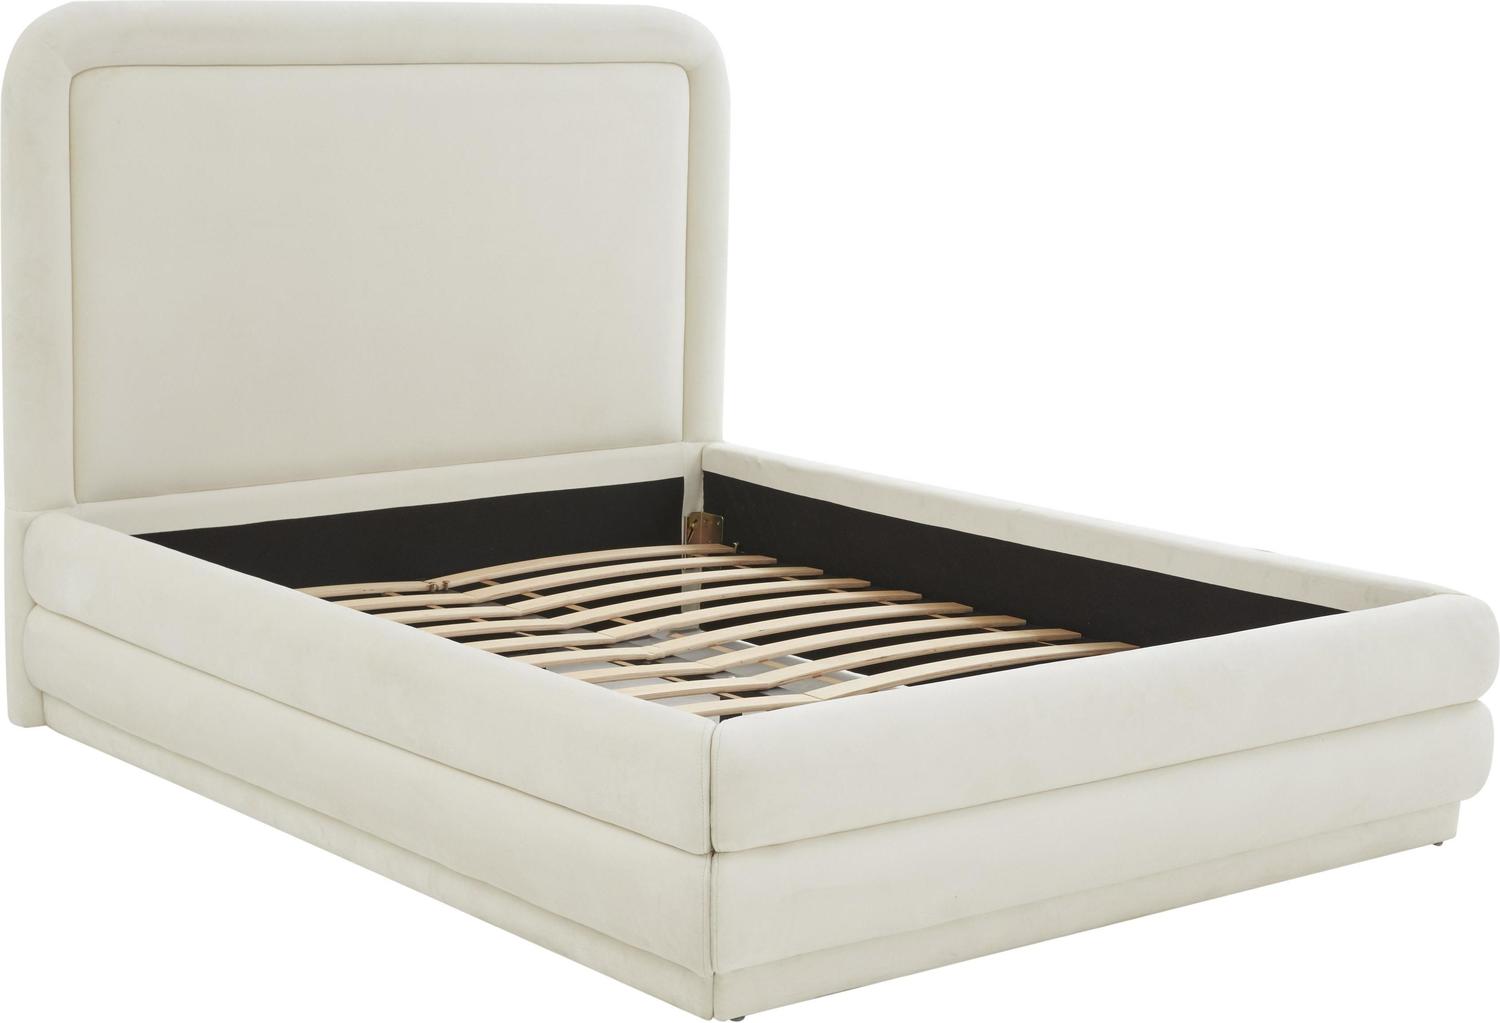 floor bed for twins Tov Furniture Beds Cream